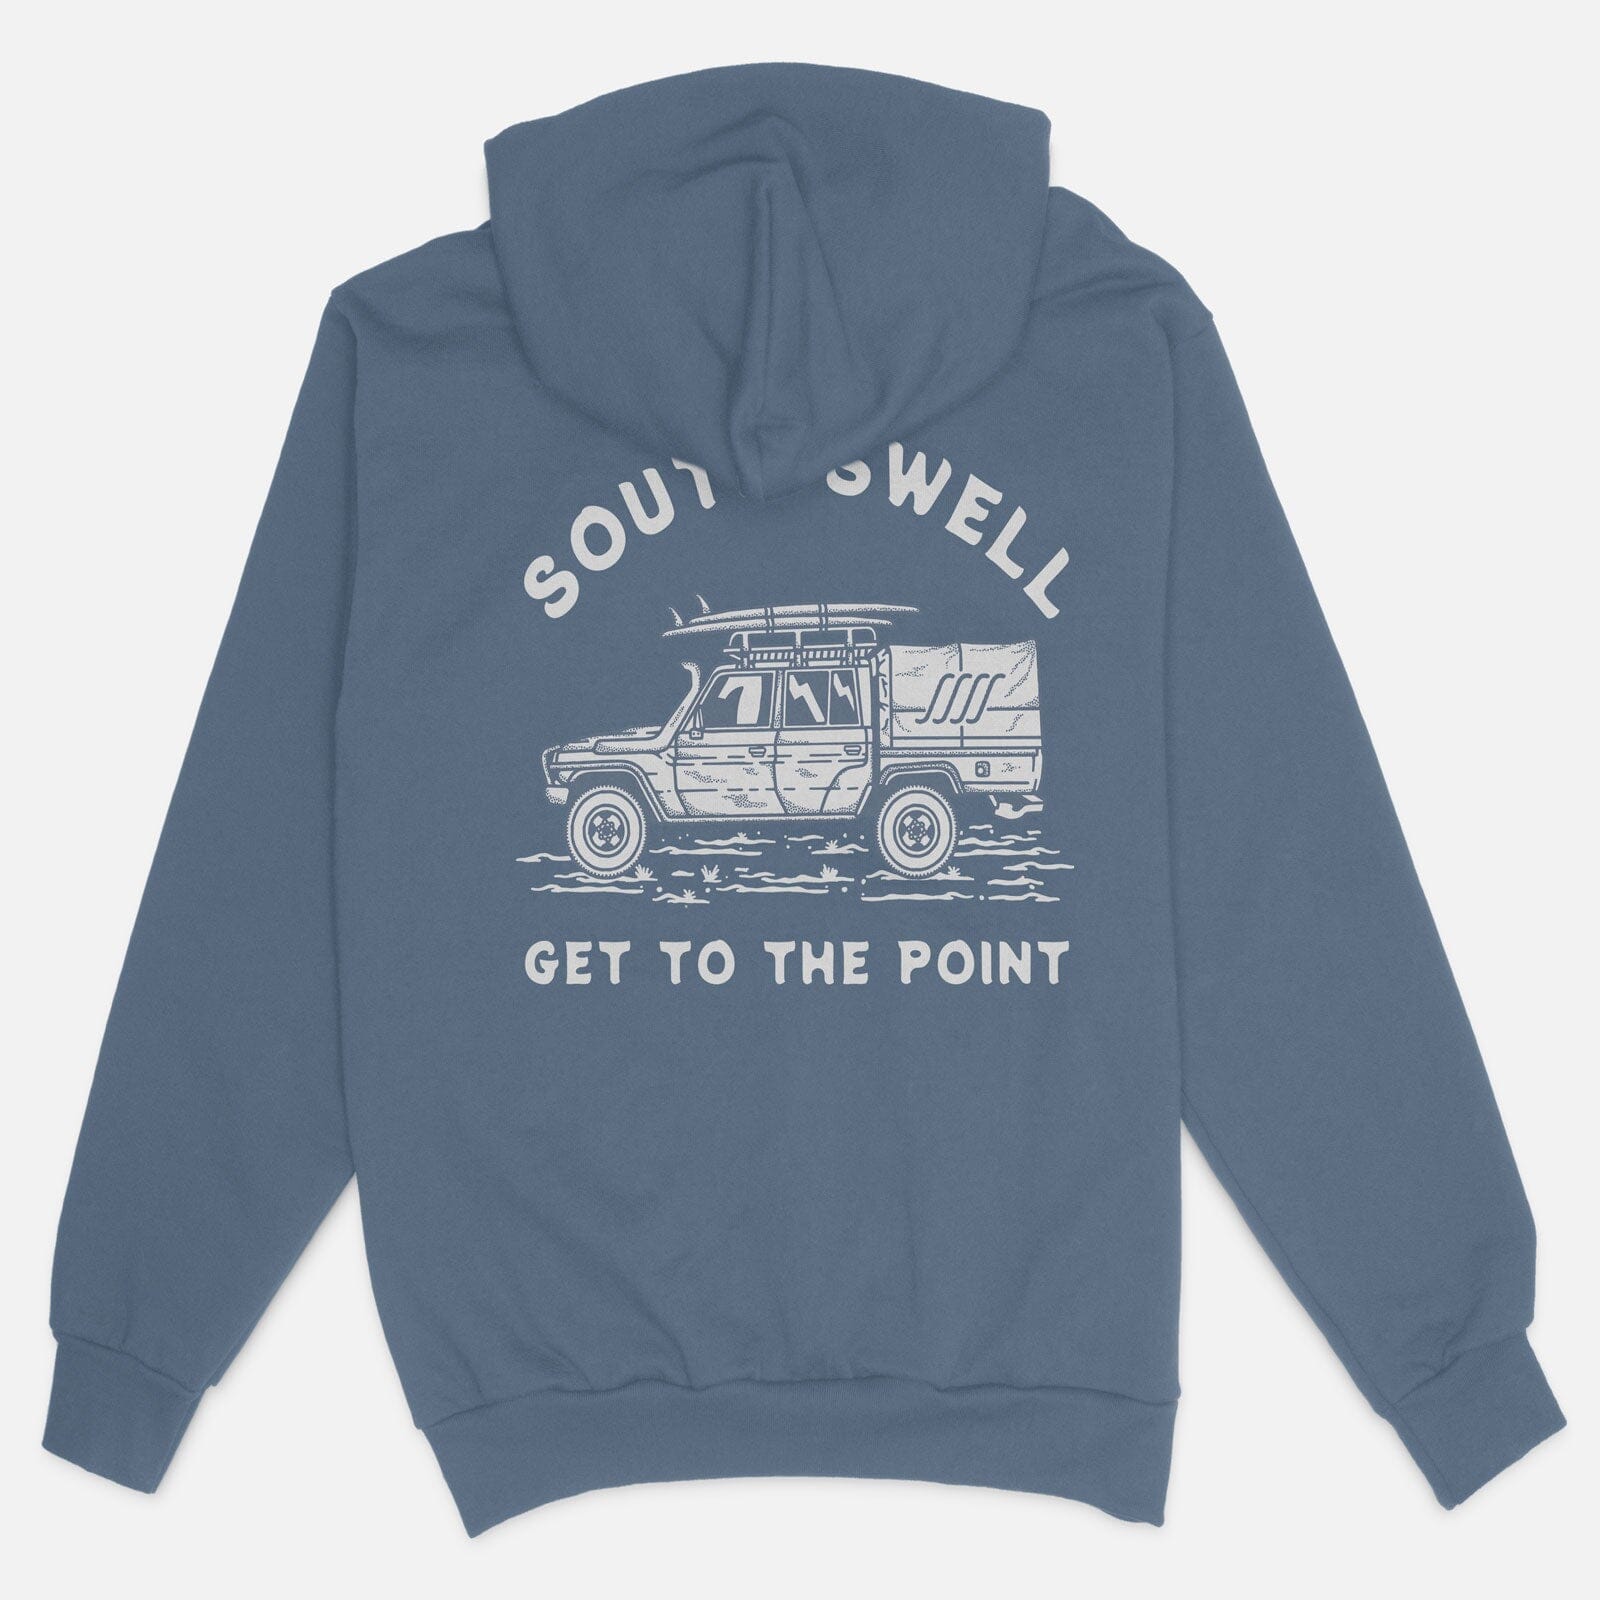 South Swell Get To The Point Hoodie M Sweatshirts & Hoodies SOUTH SWELL 